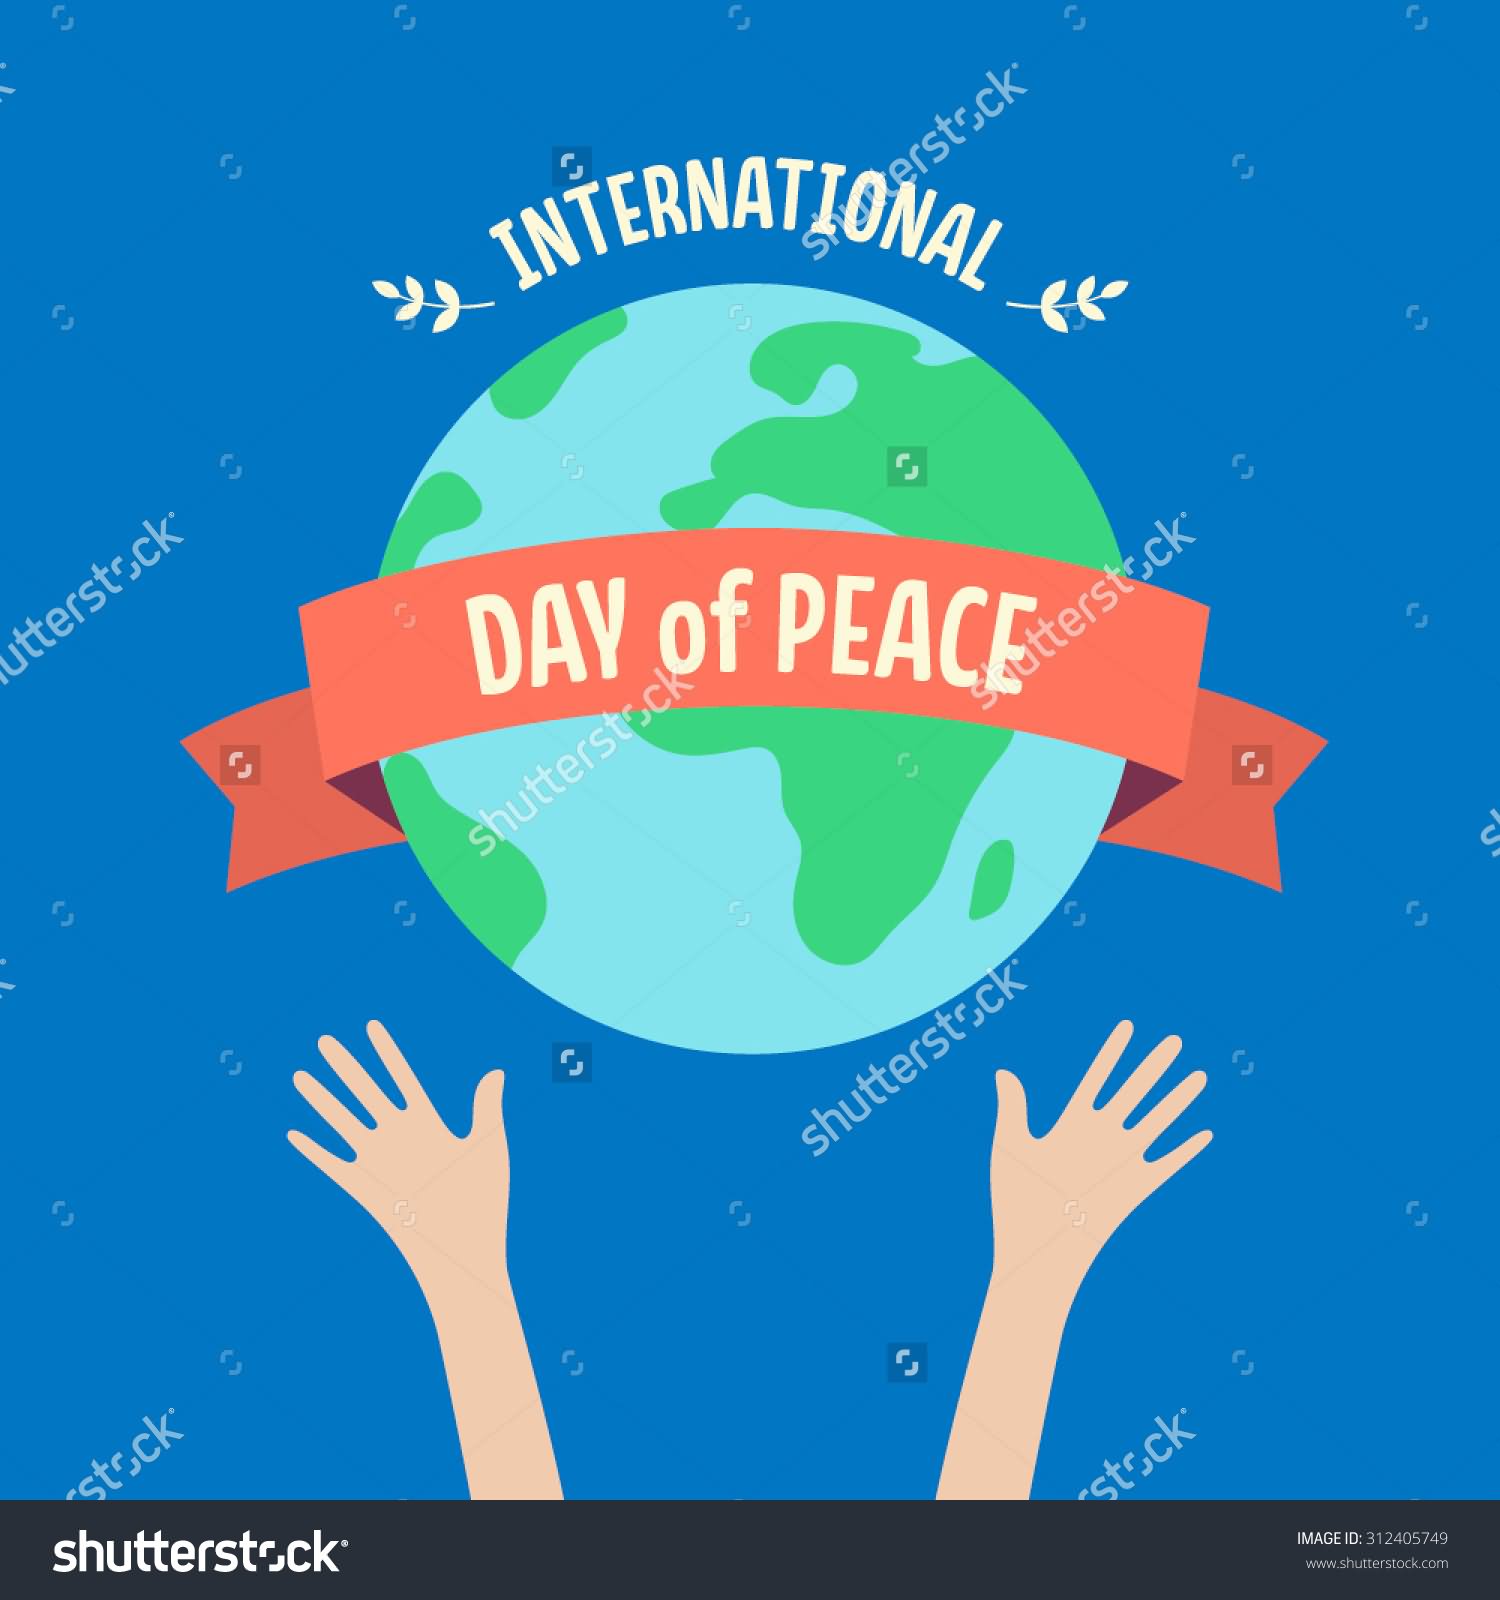 International Day Of Peace Hands With Globe Poster Image